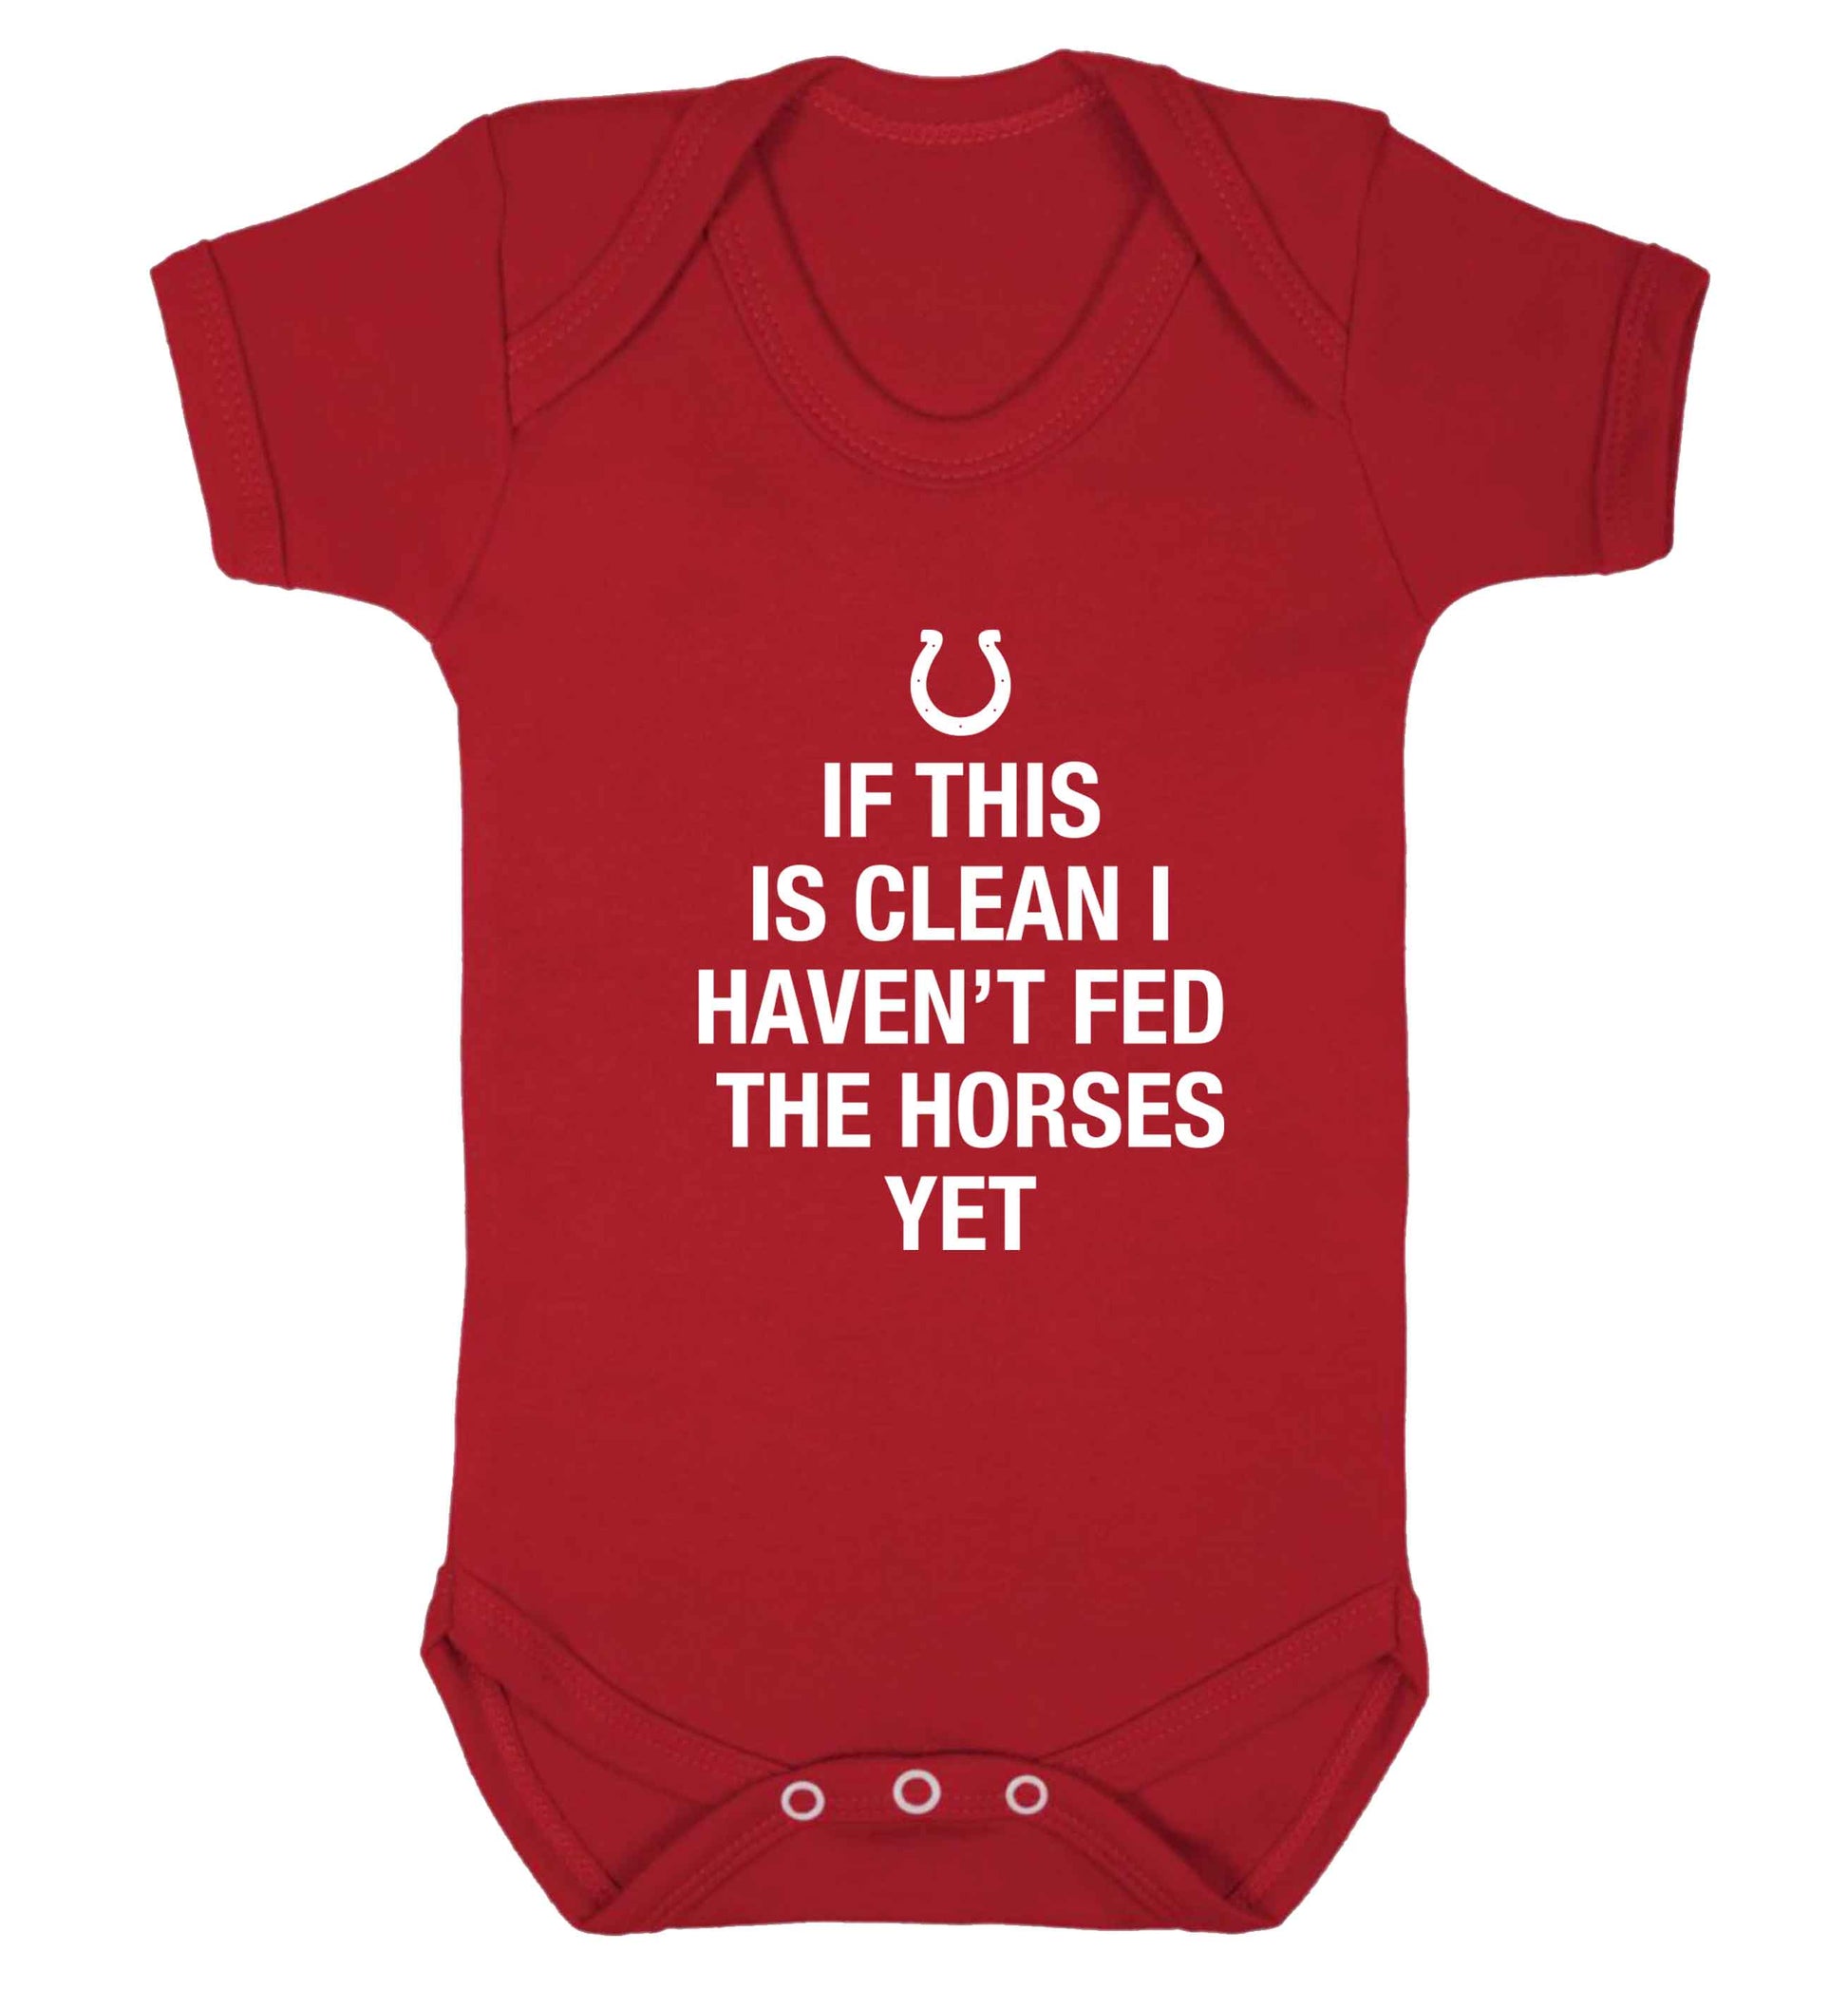 If this isn't clean I haven't fed the horses yet baby vest red 18-24 months